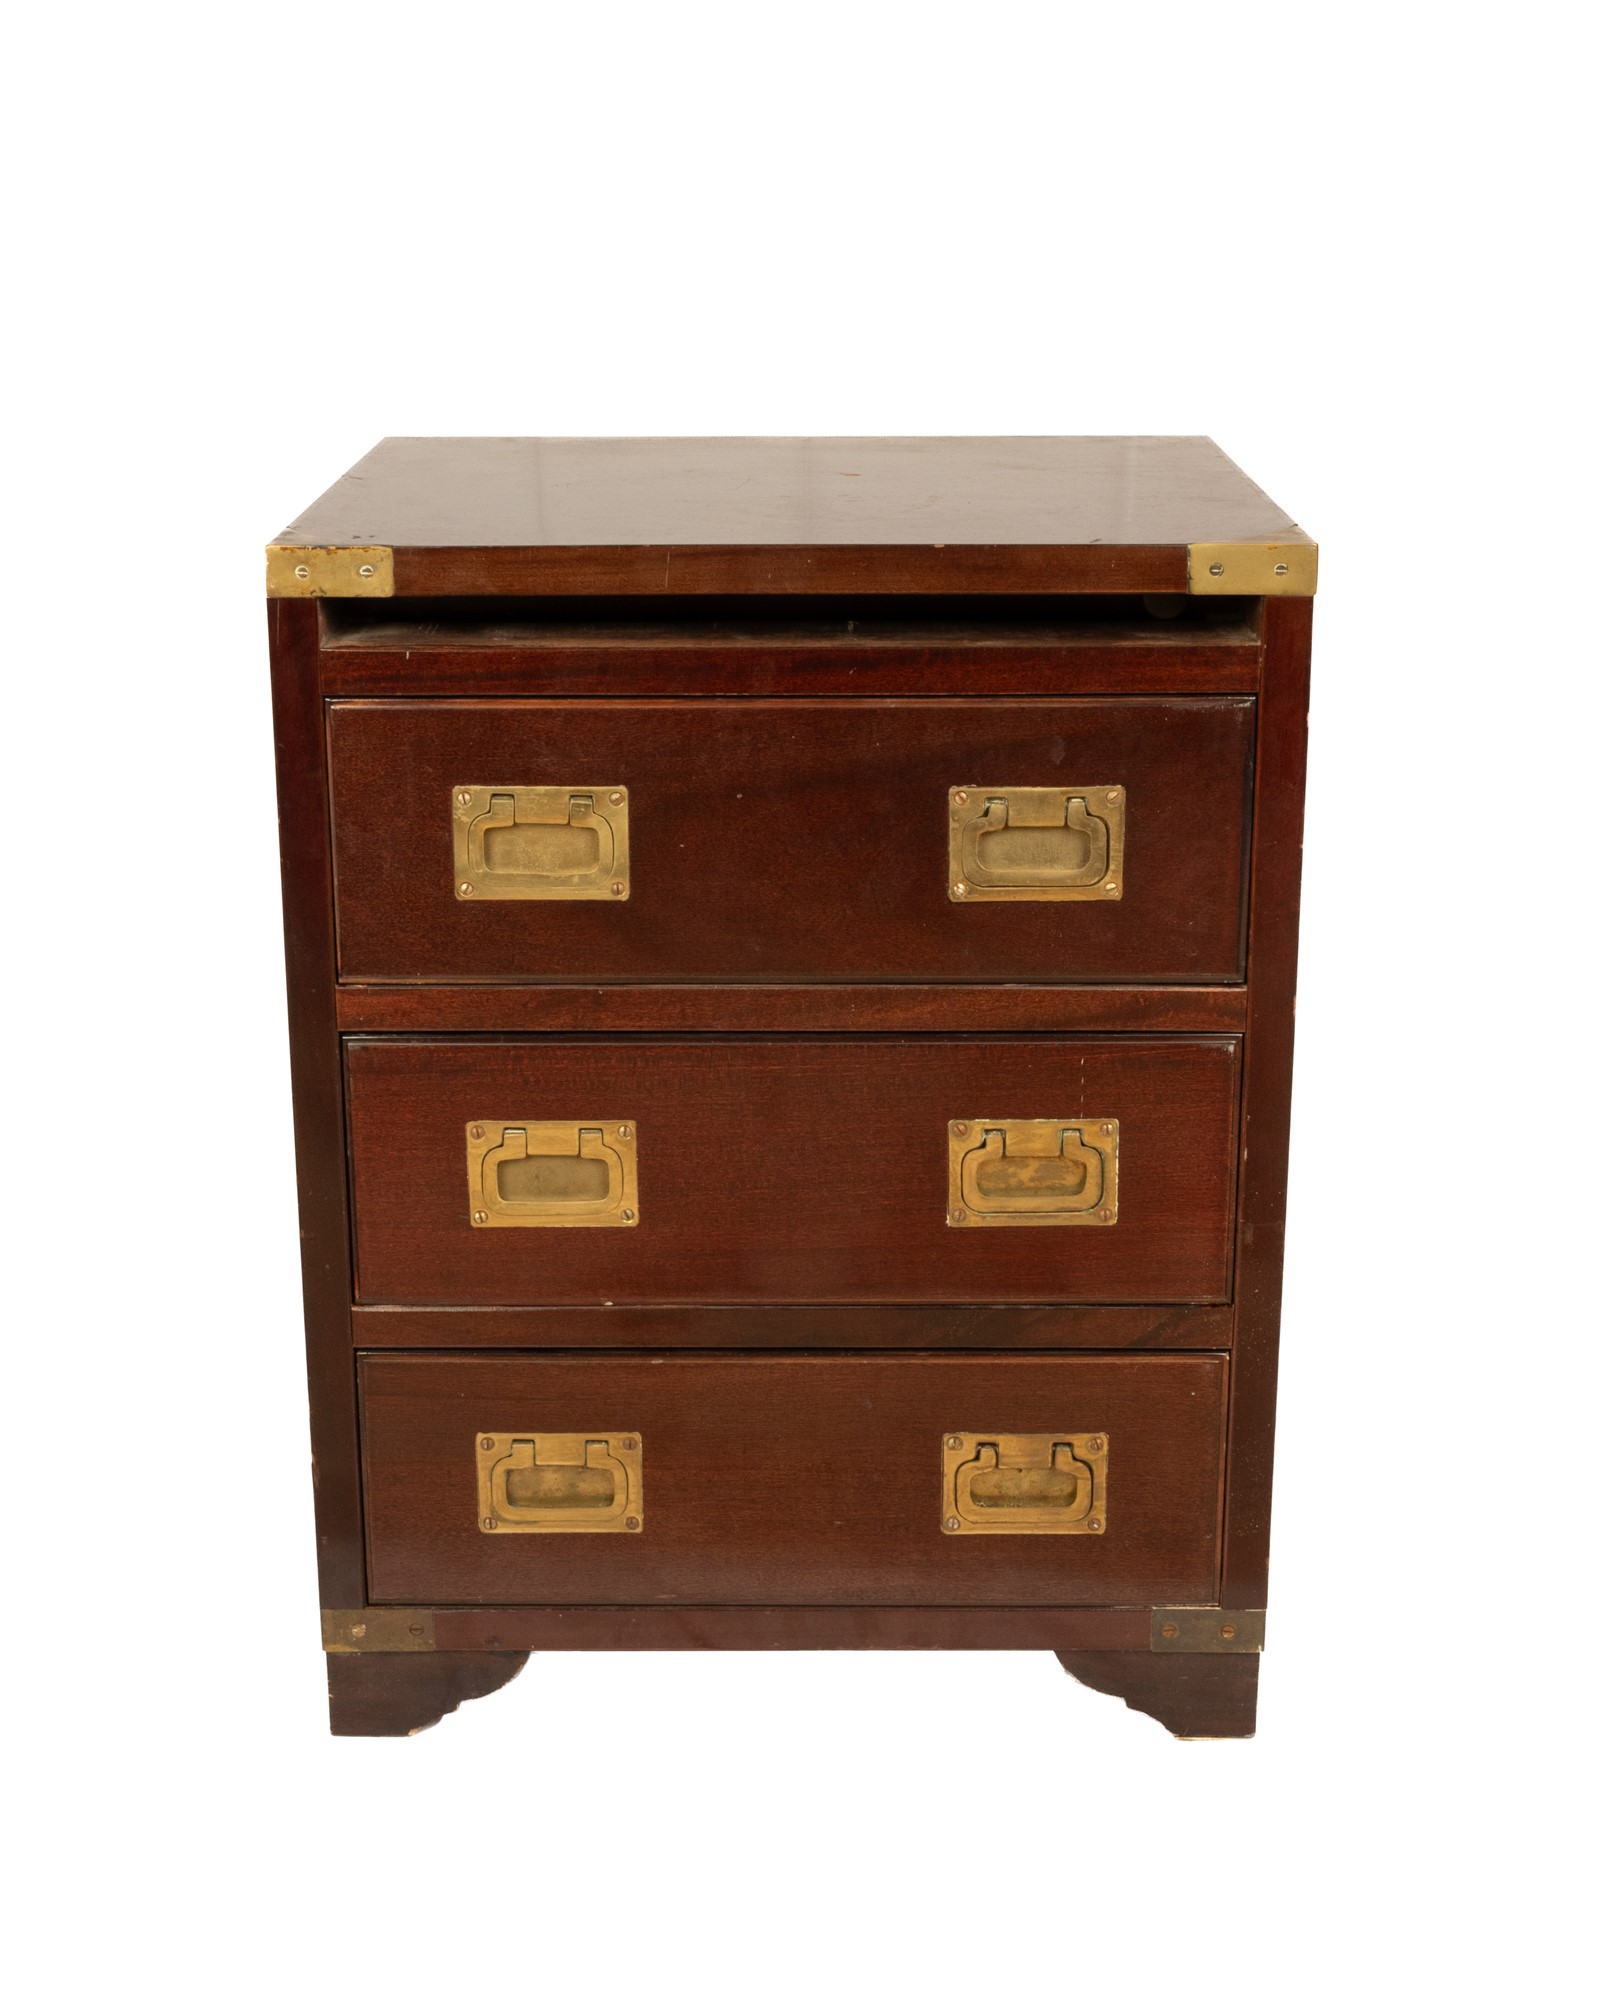 Antica Marina wooden bedside table with brass inserts - Image 13 of 23